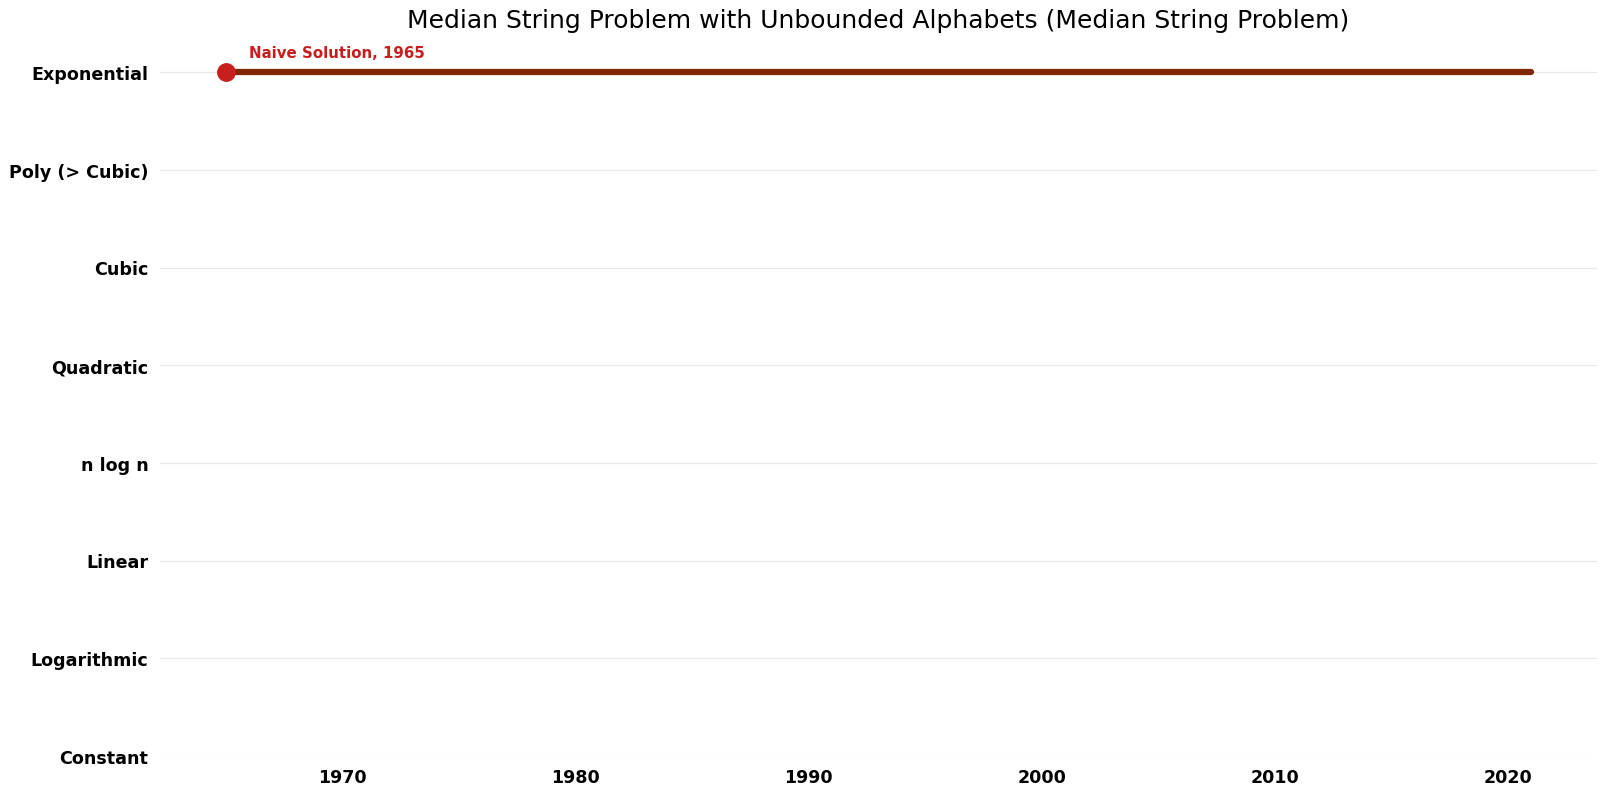 Median String Problem - Median String Problem with Unbounded Alphabets - Time.png